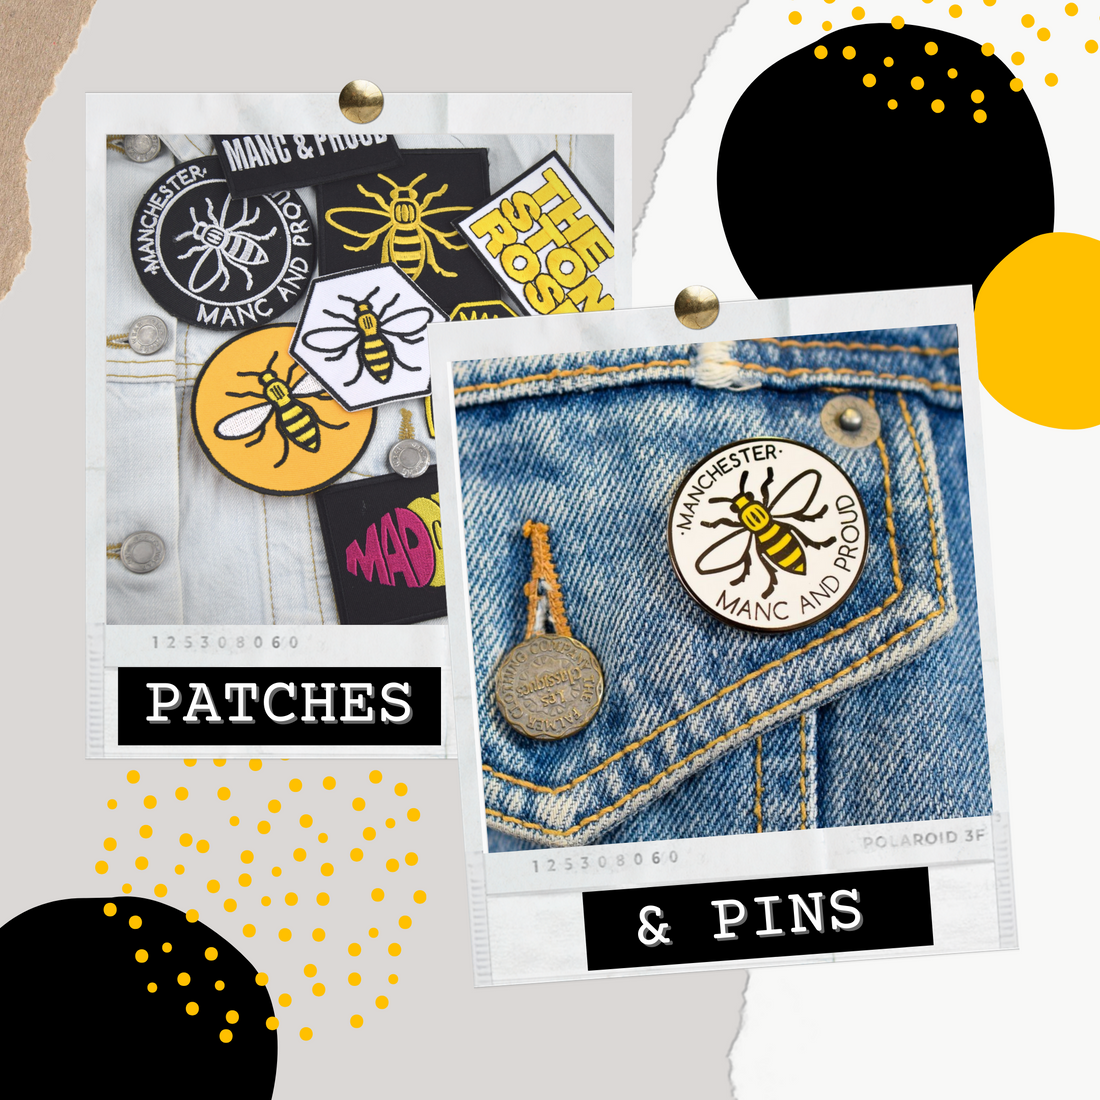 Get Creative with Patches & Pins 🐝